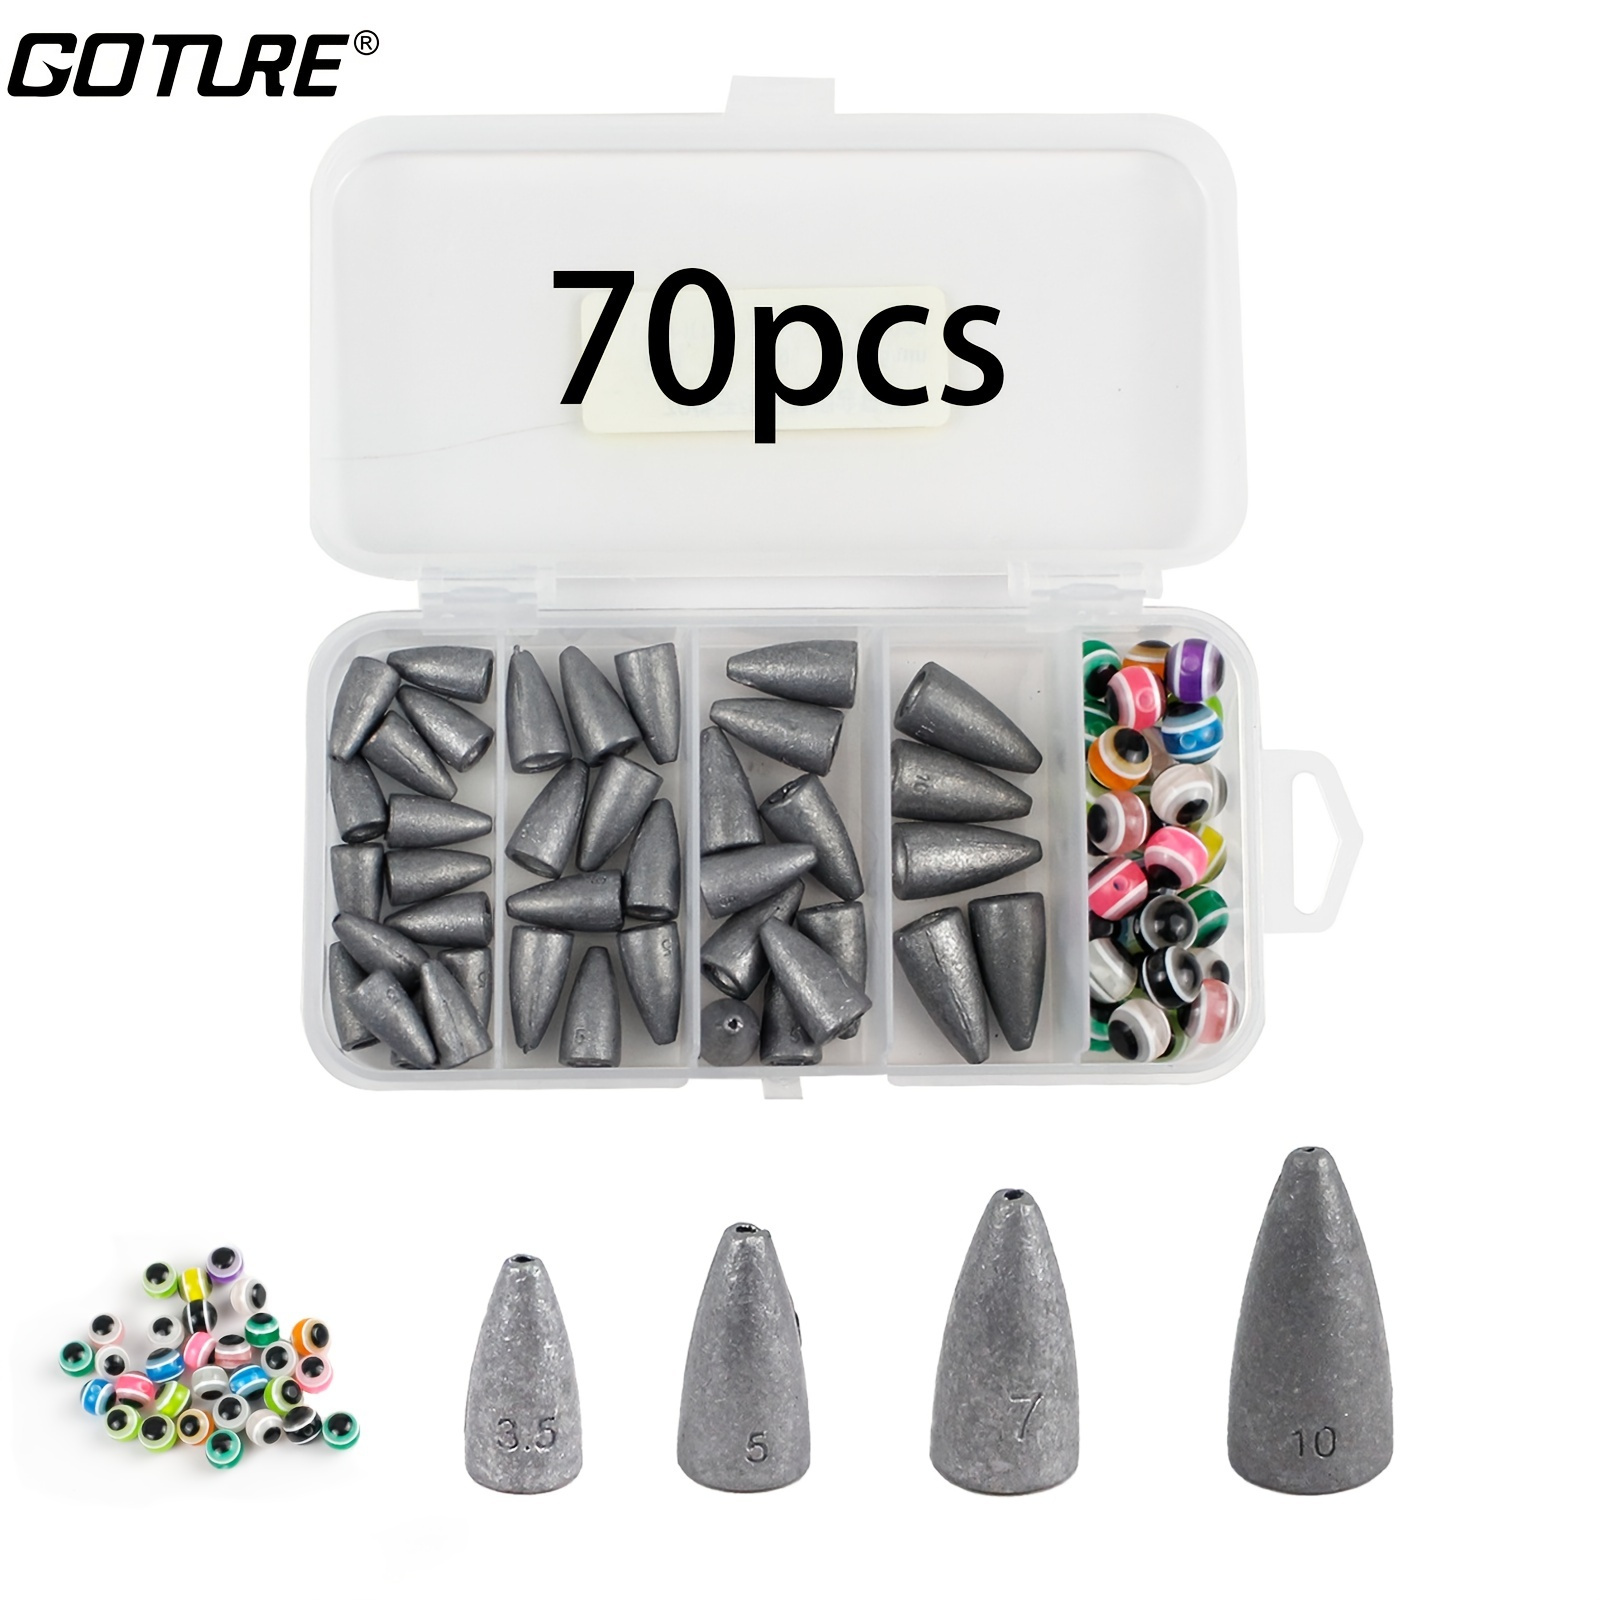 70pcs * Fishing Weights And Beads Kit - Slip Bullet Sinkers, Worm Weights,  Fish Eye Beads For Improved Fishing Accuracy And Success